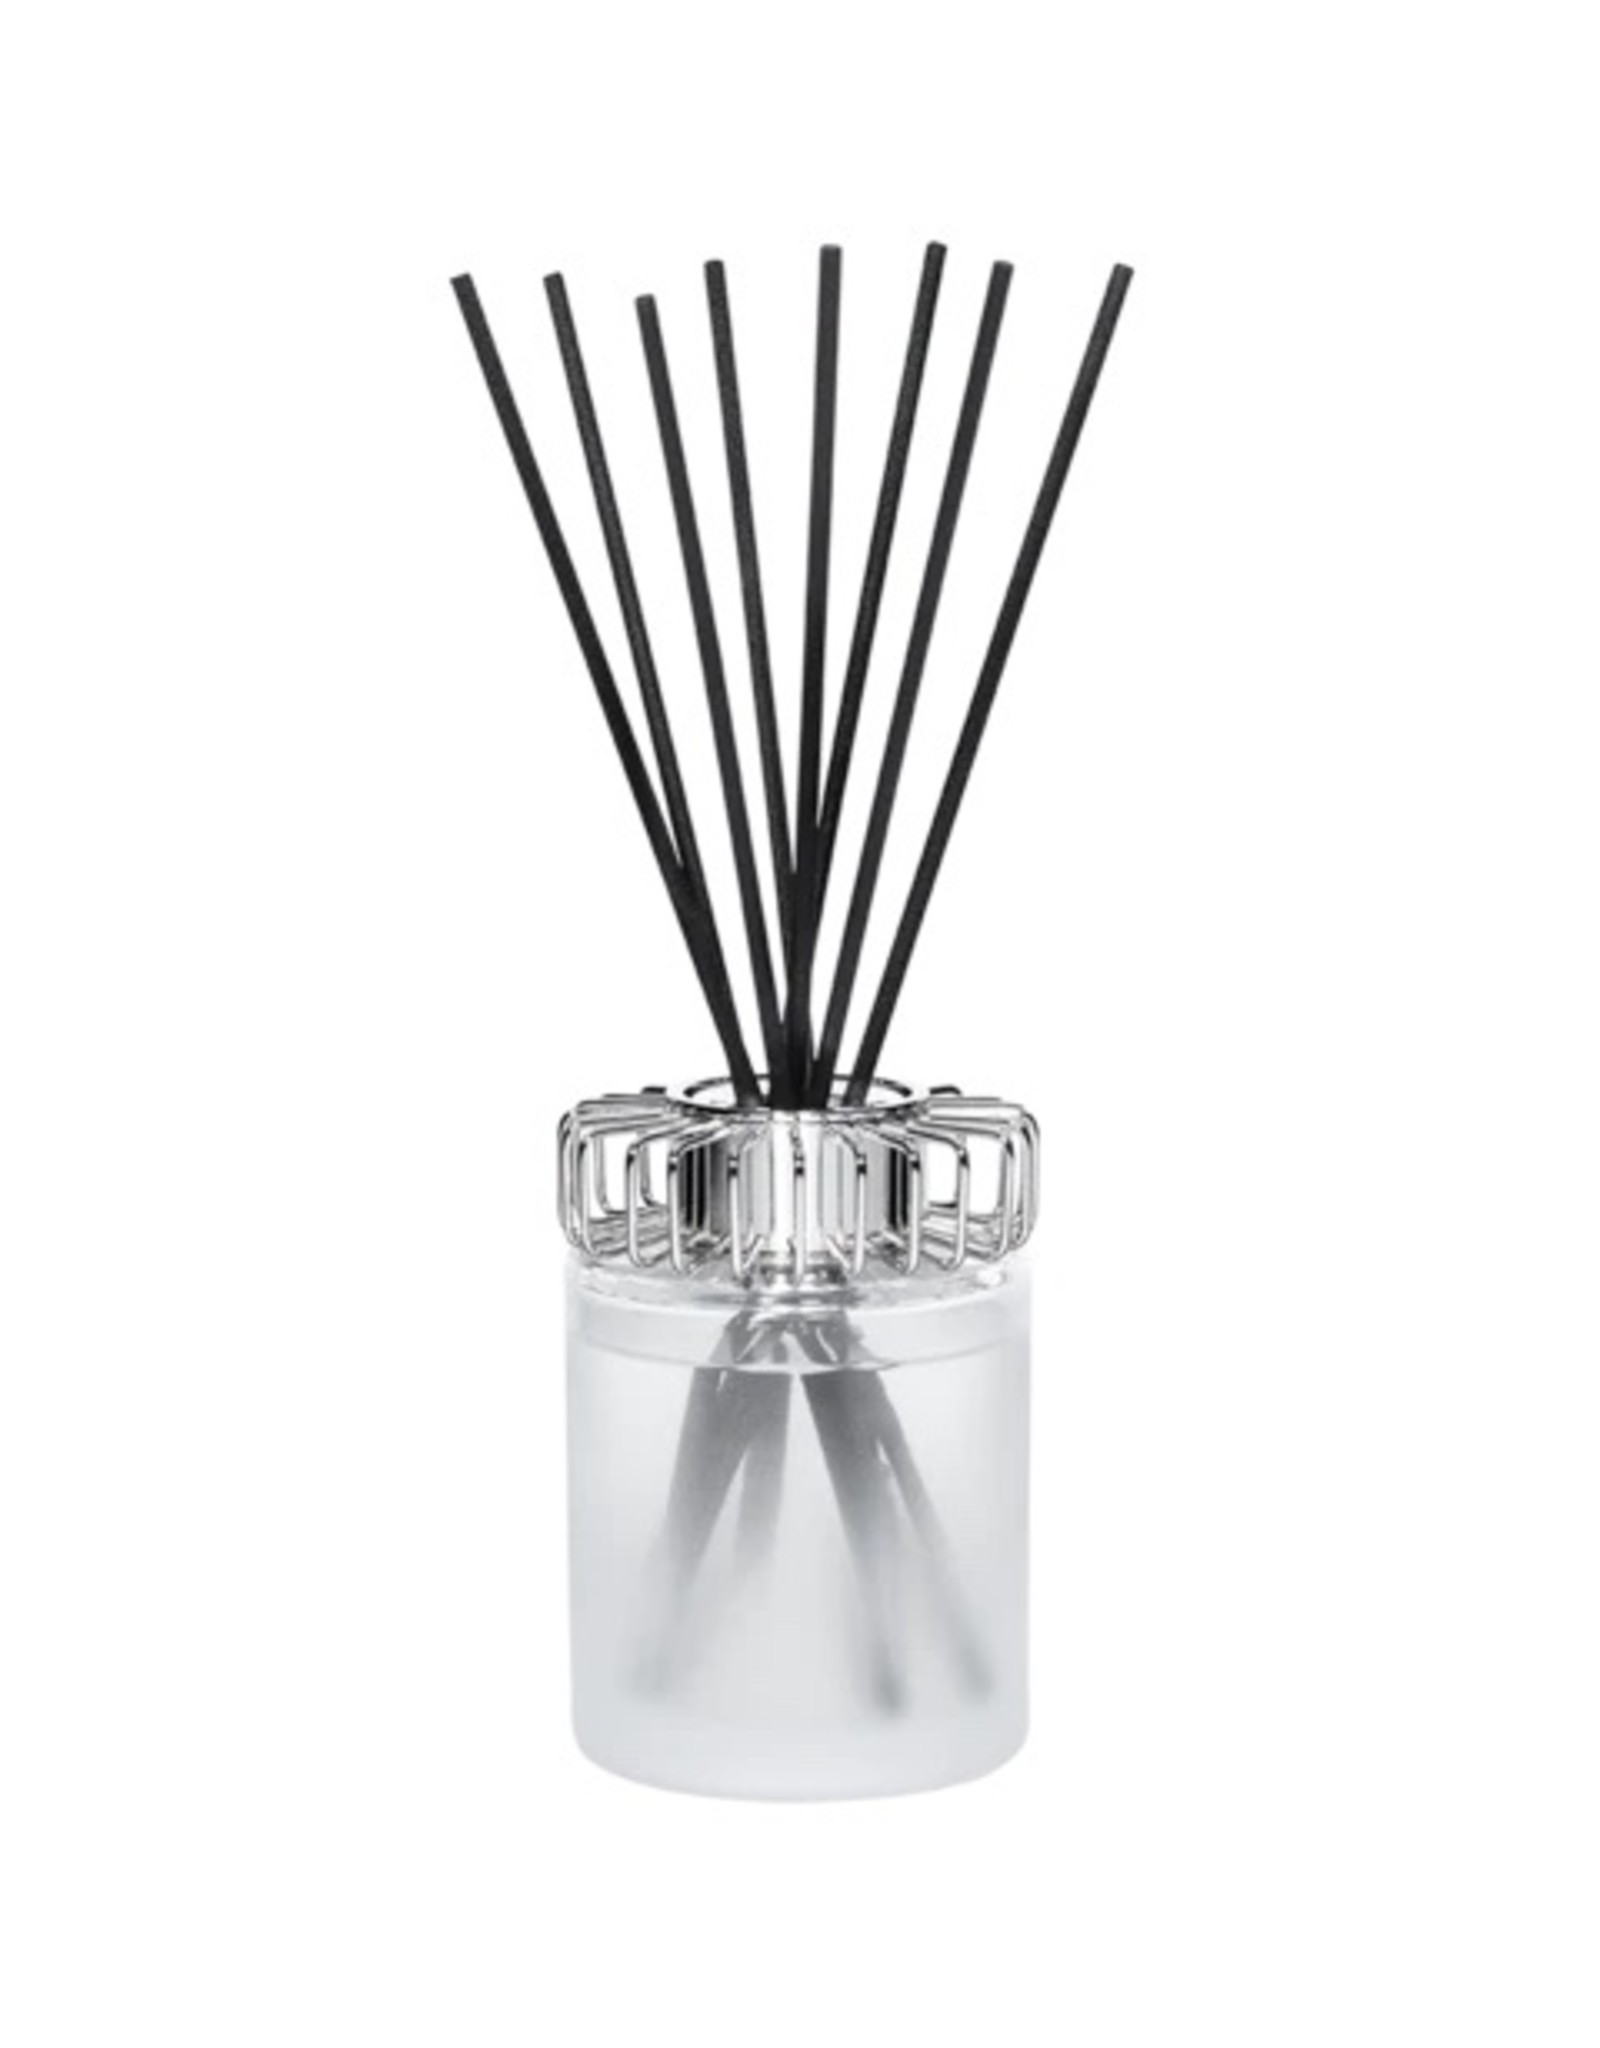 Maison Berger Land Frosted White Pre-filled Pure White Tea Reed Diffuser